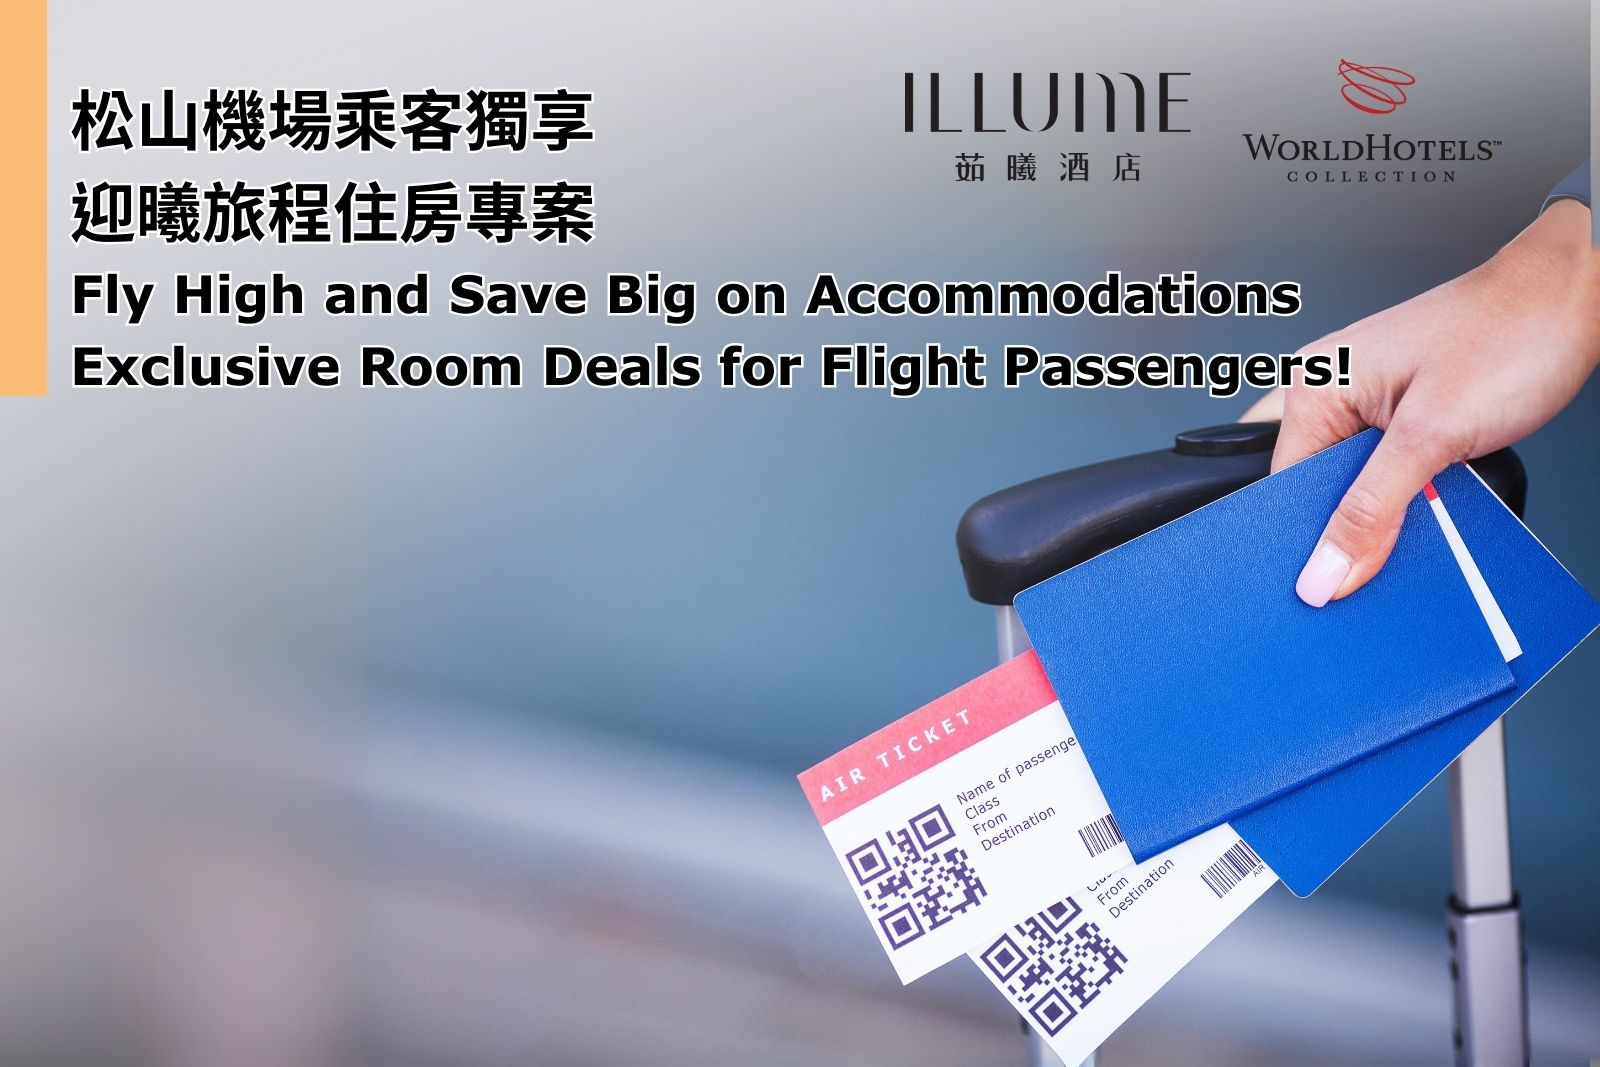 Fly High and Save Big on Accommodations: Exclusive Room Deals for Flight Passengers!